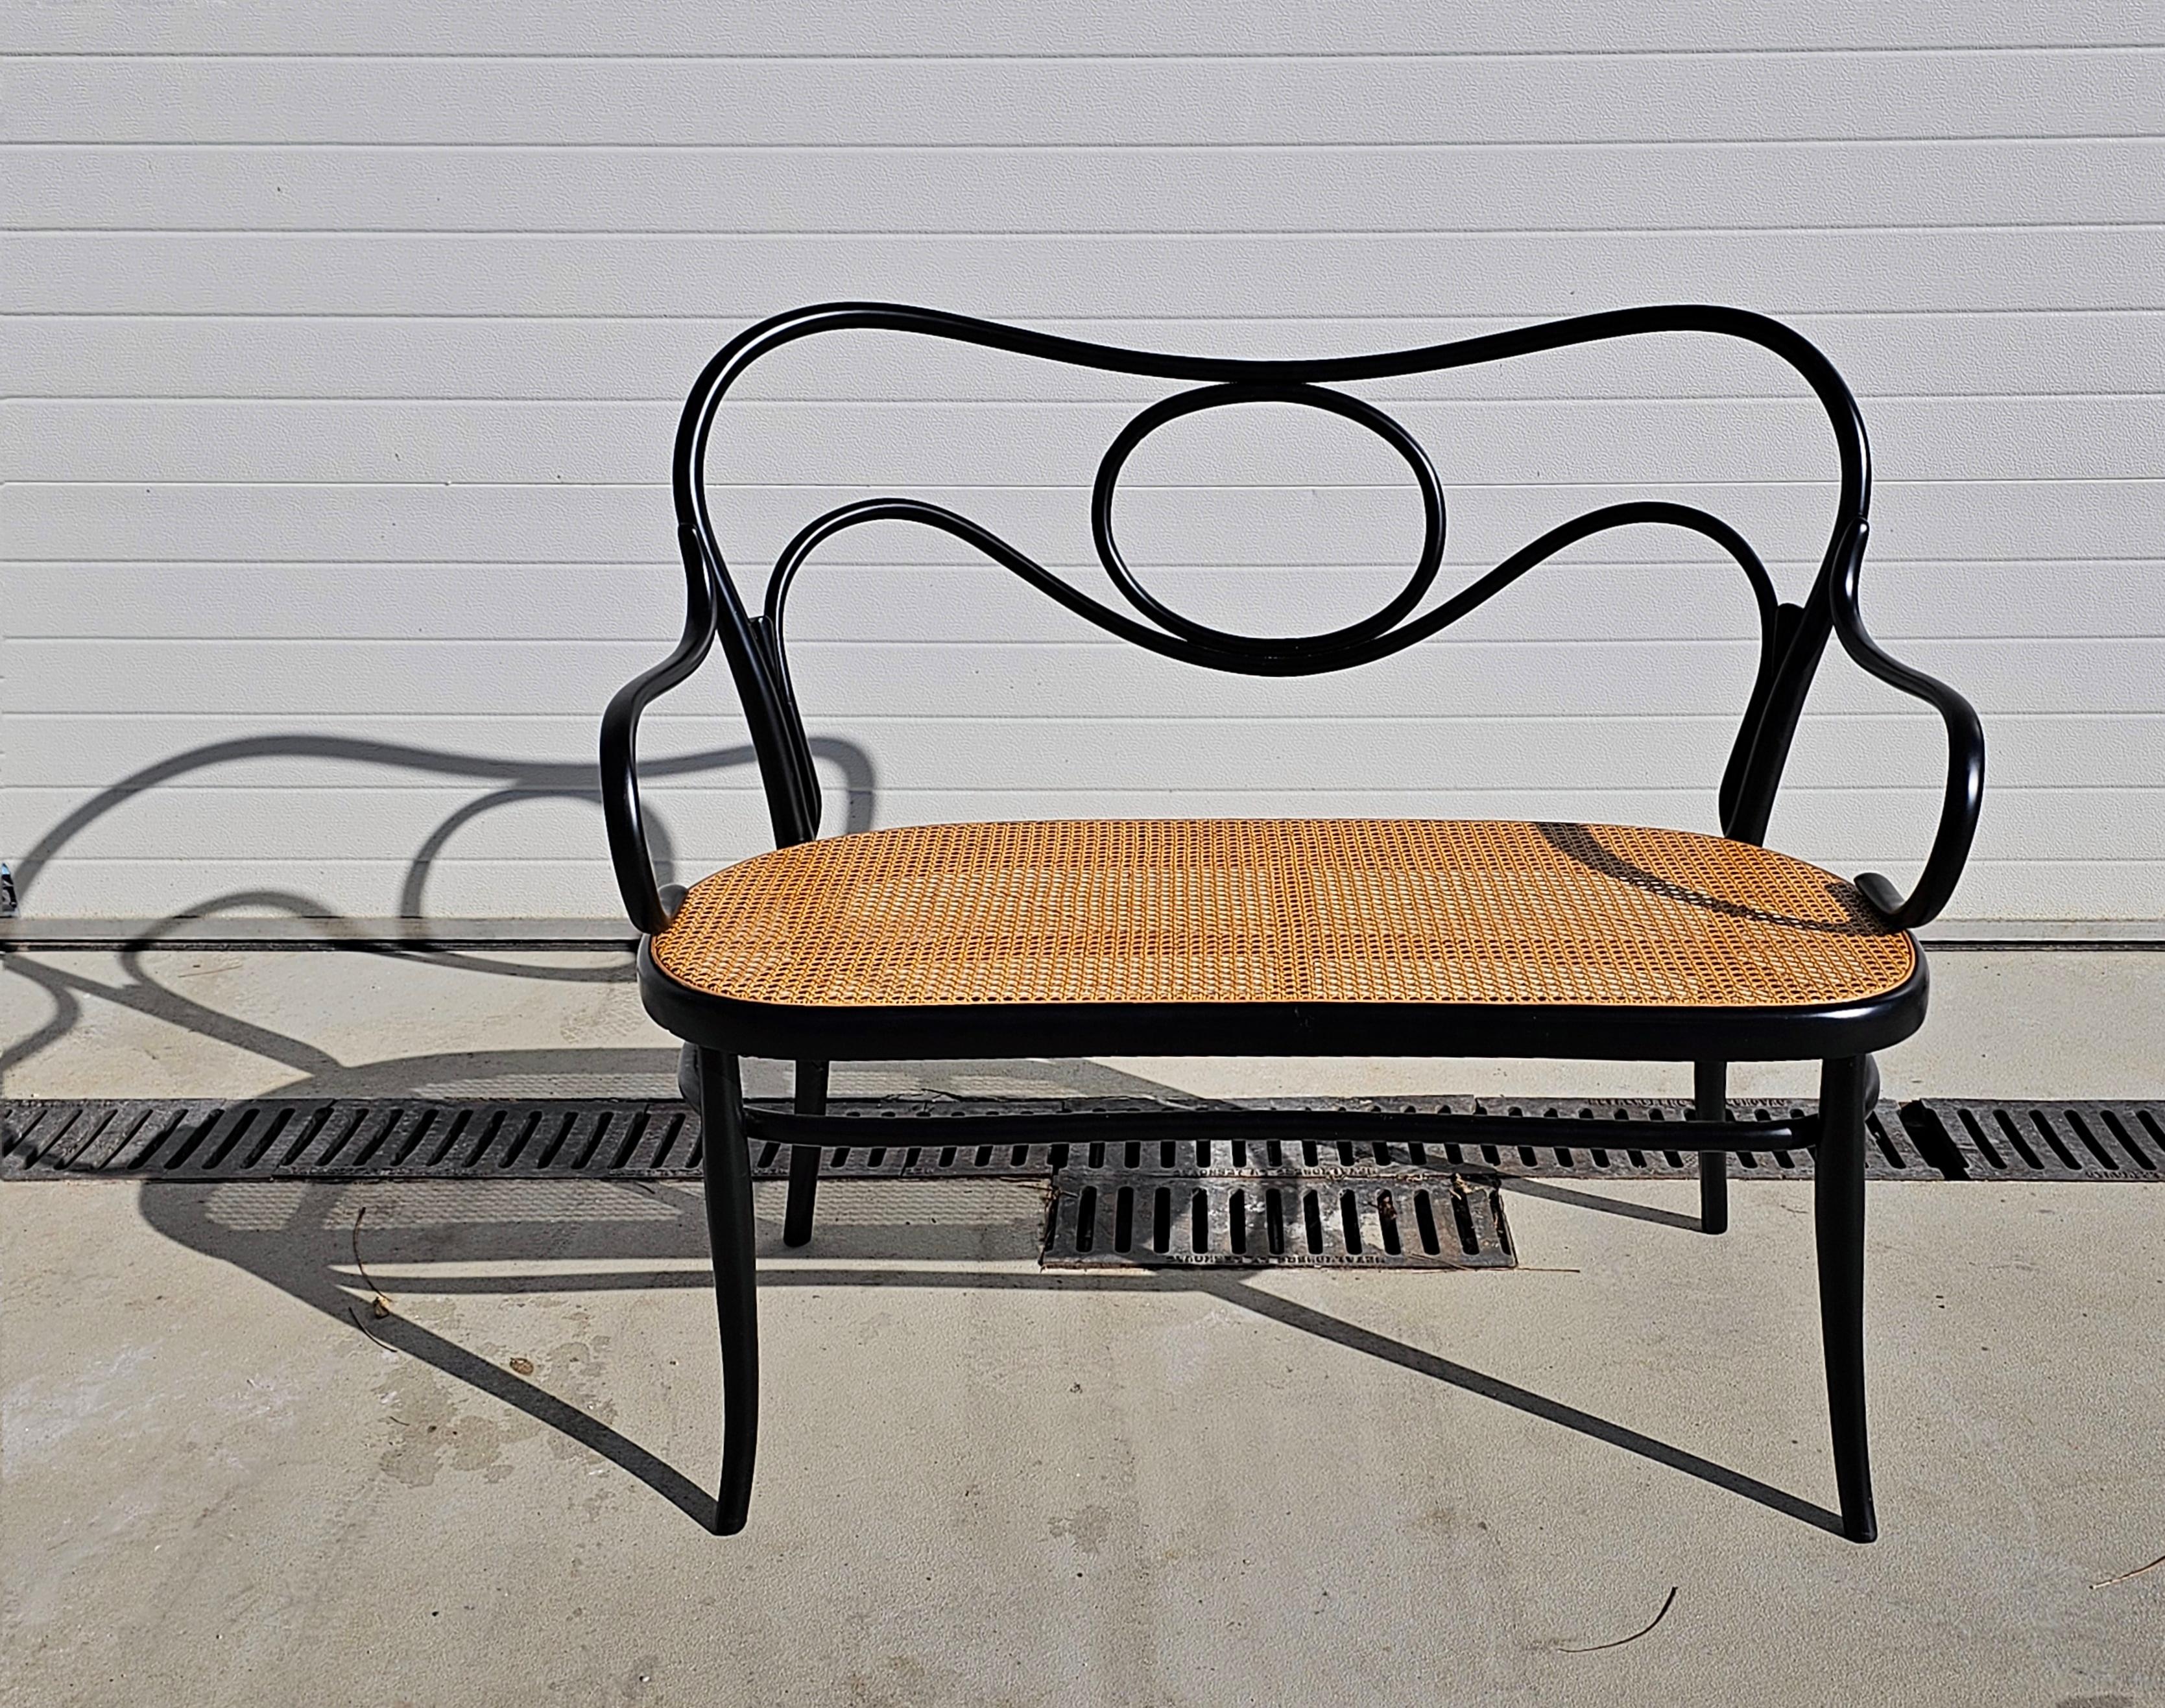 Late 19th Century Viennese Secession Bentwood Settee with Cane Seat by Thonet, Austria 1890s